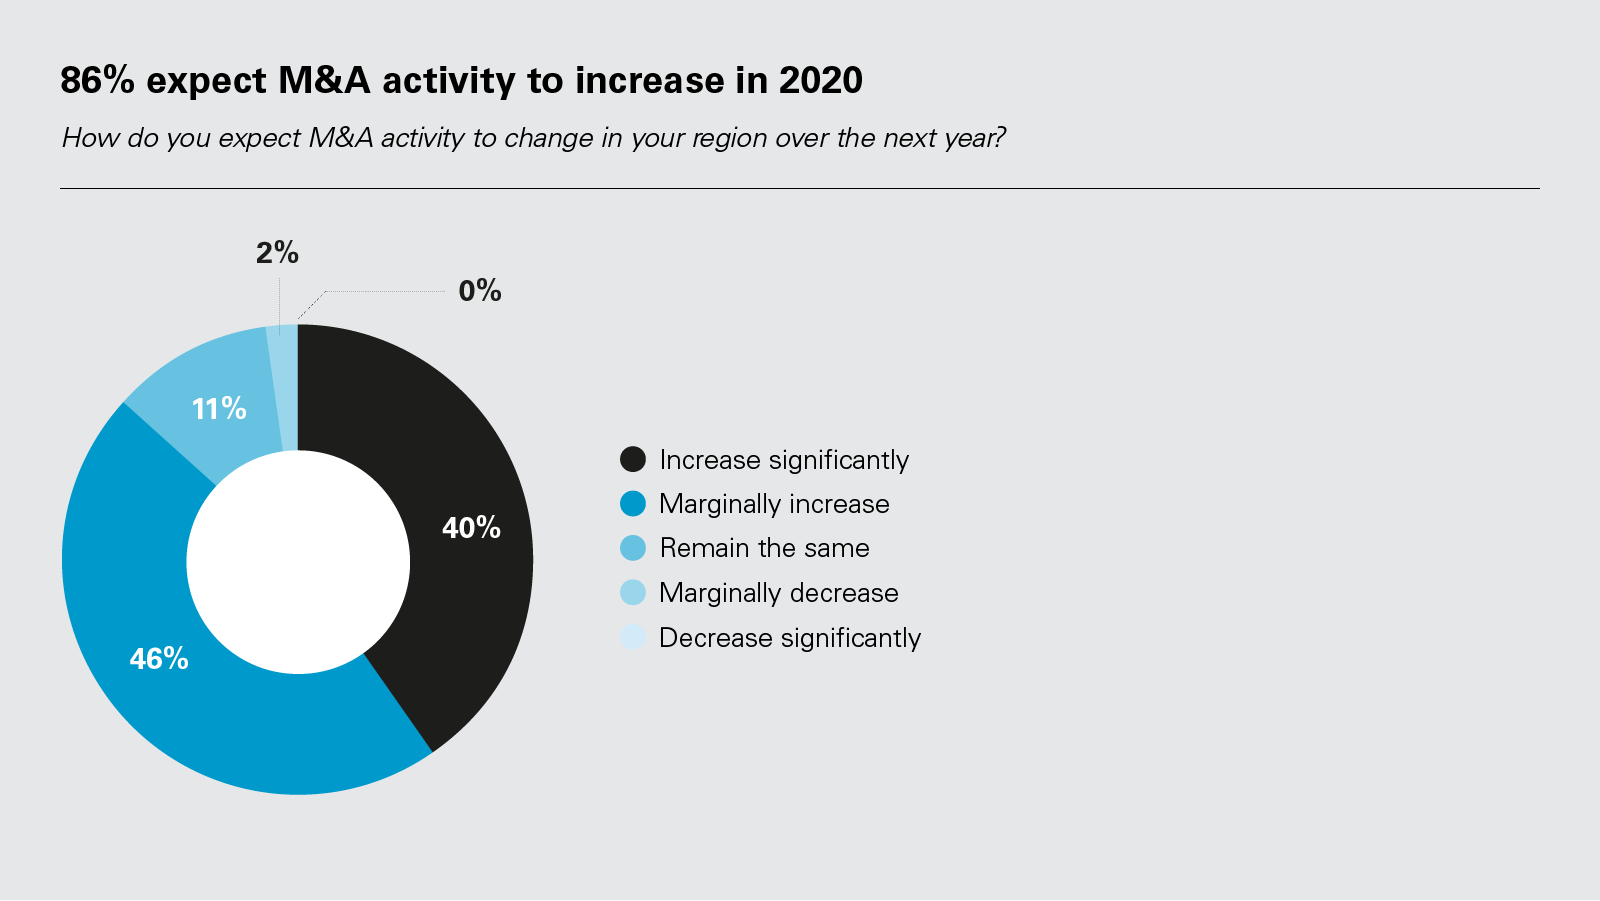 86% expect M&A activity to increase in 2020